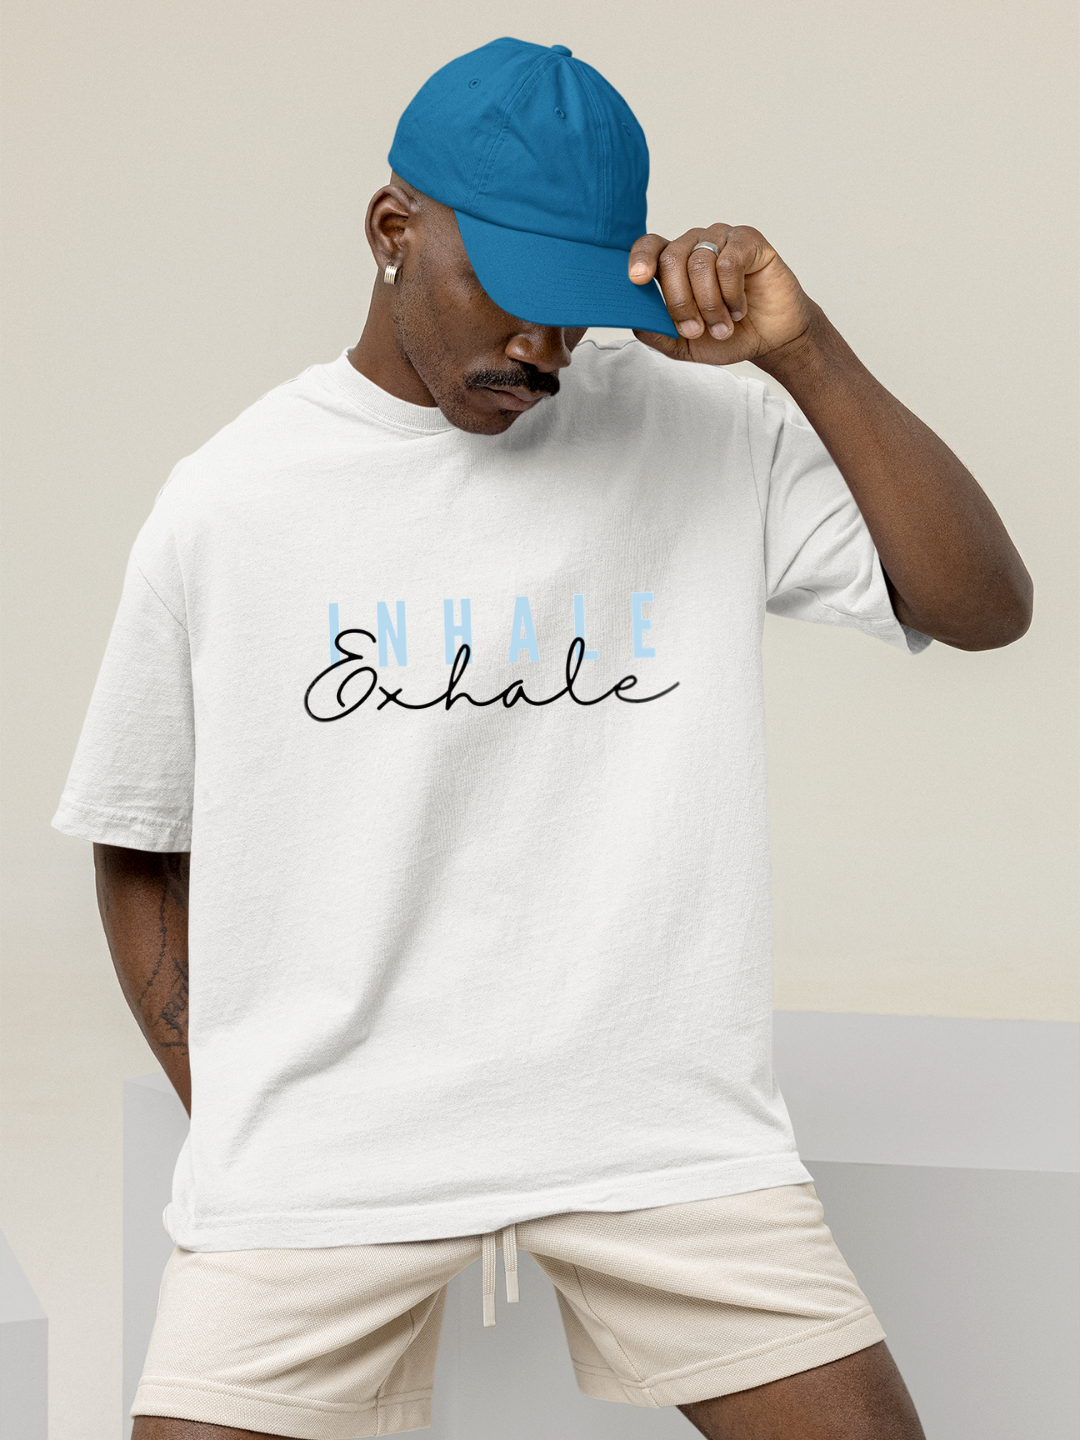 inhale Exhale Oversized T-Shirt - White